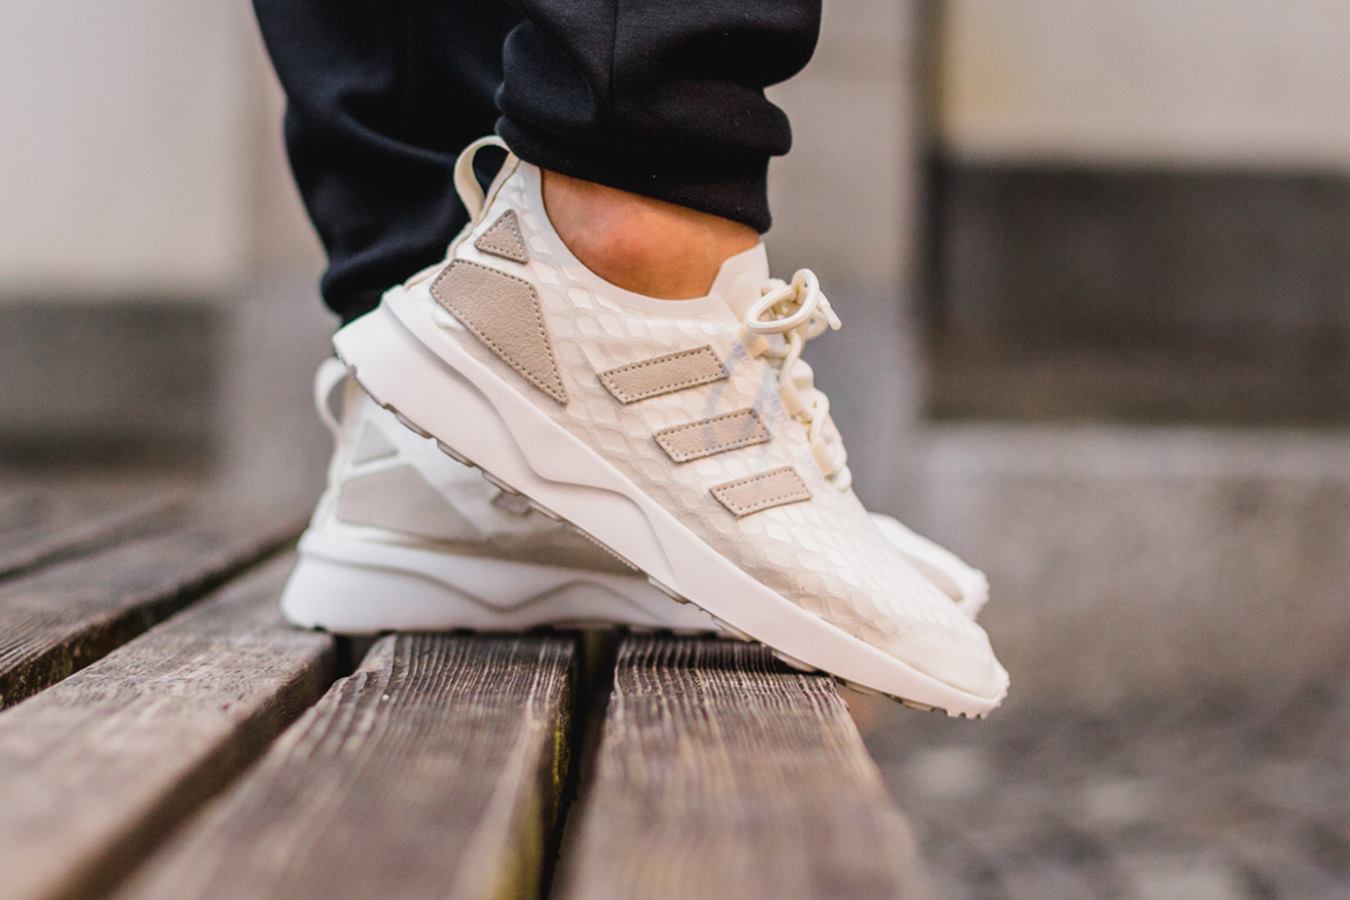 adidas ZX Flux Adv Verve Off White Release Date